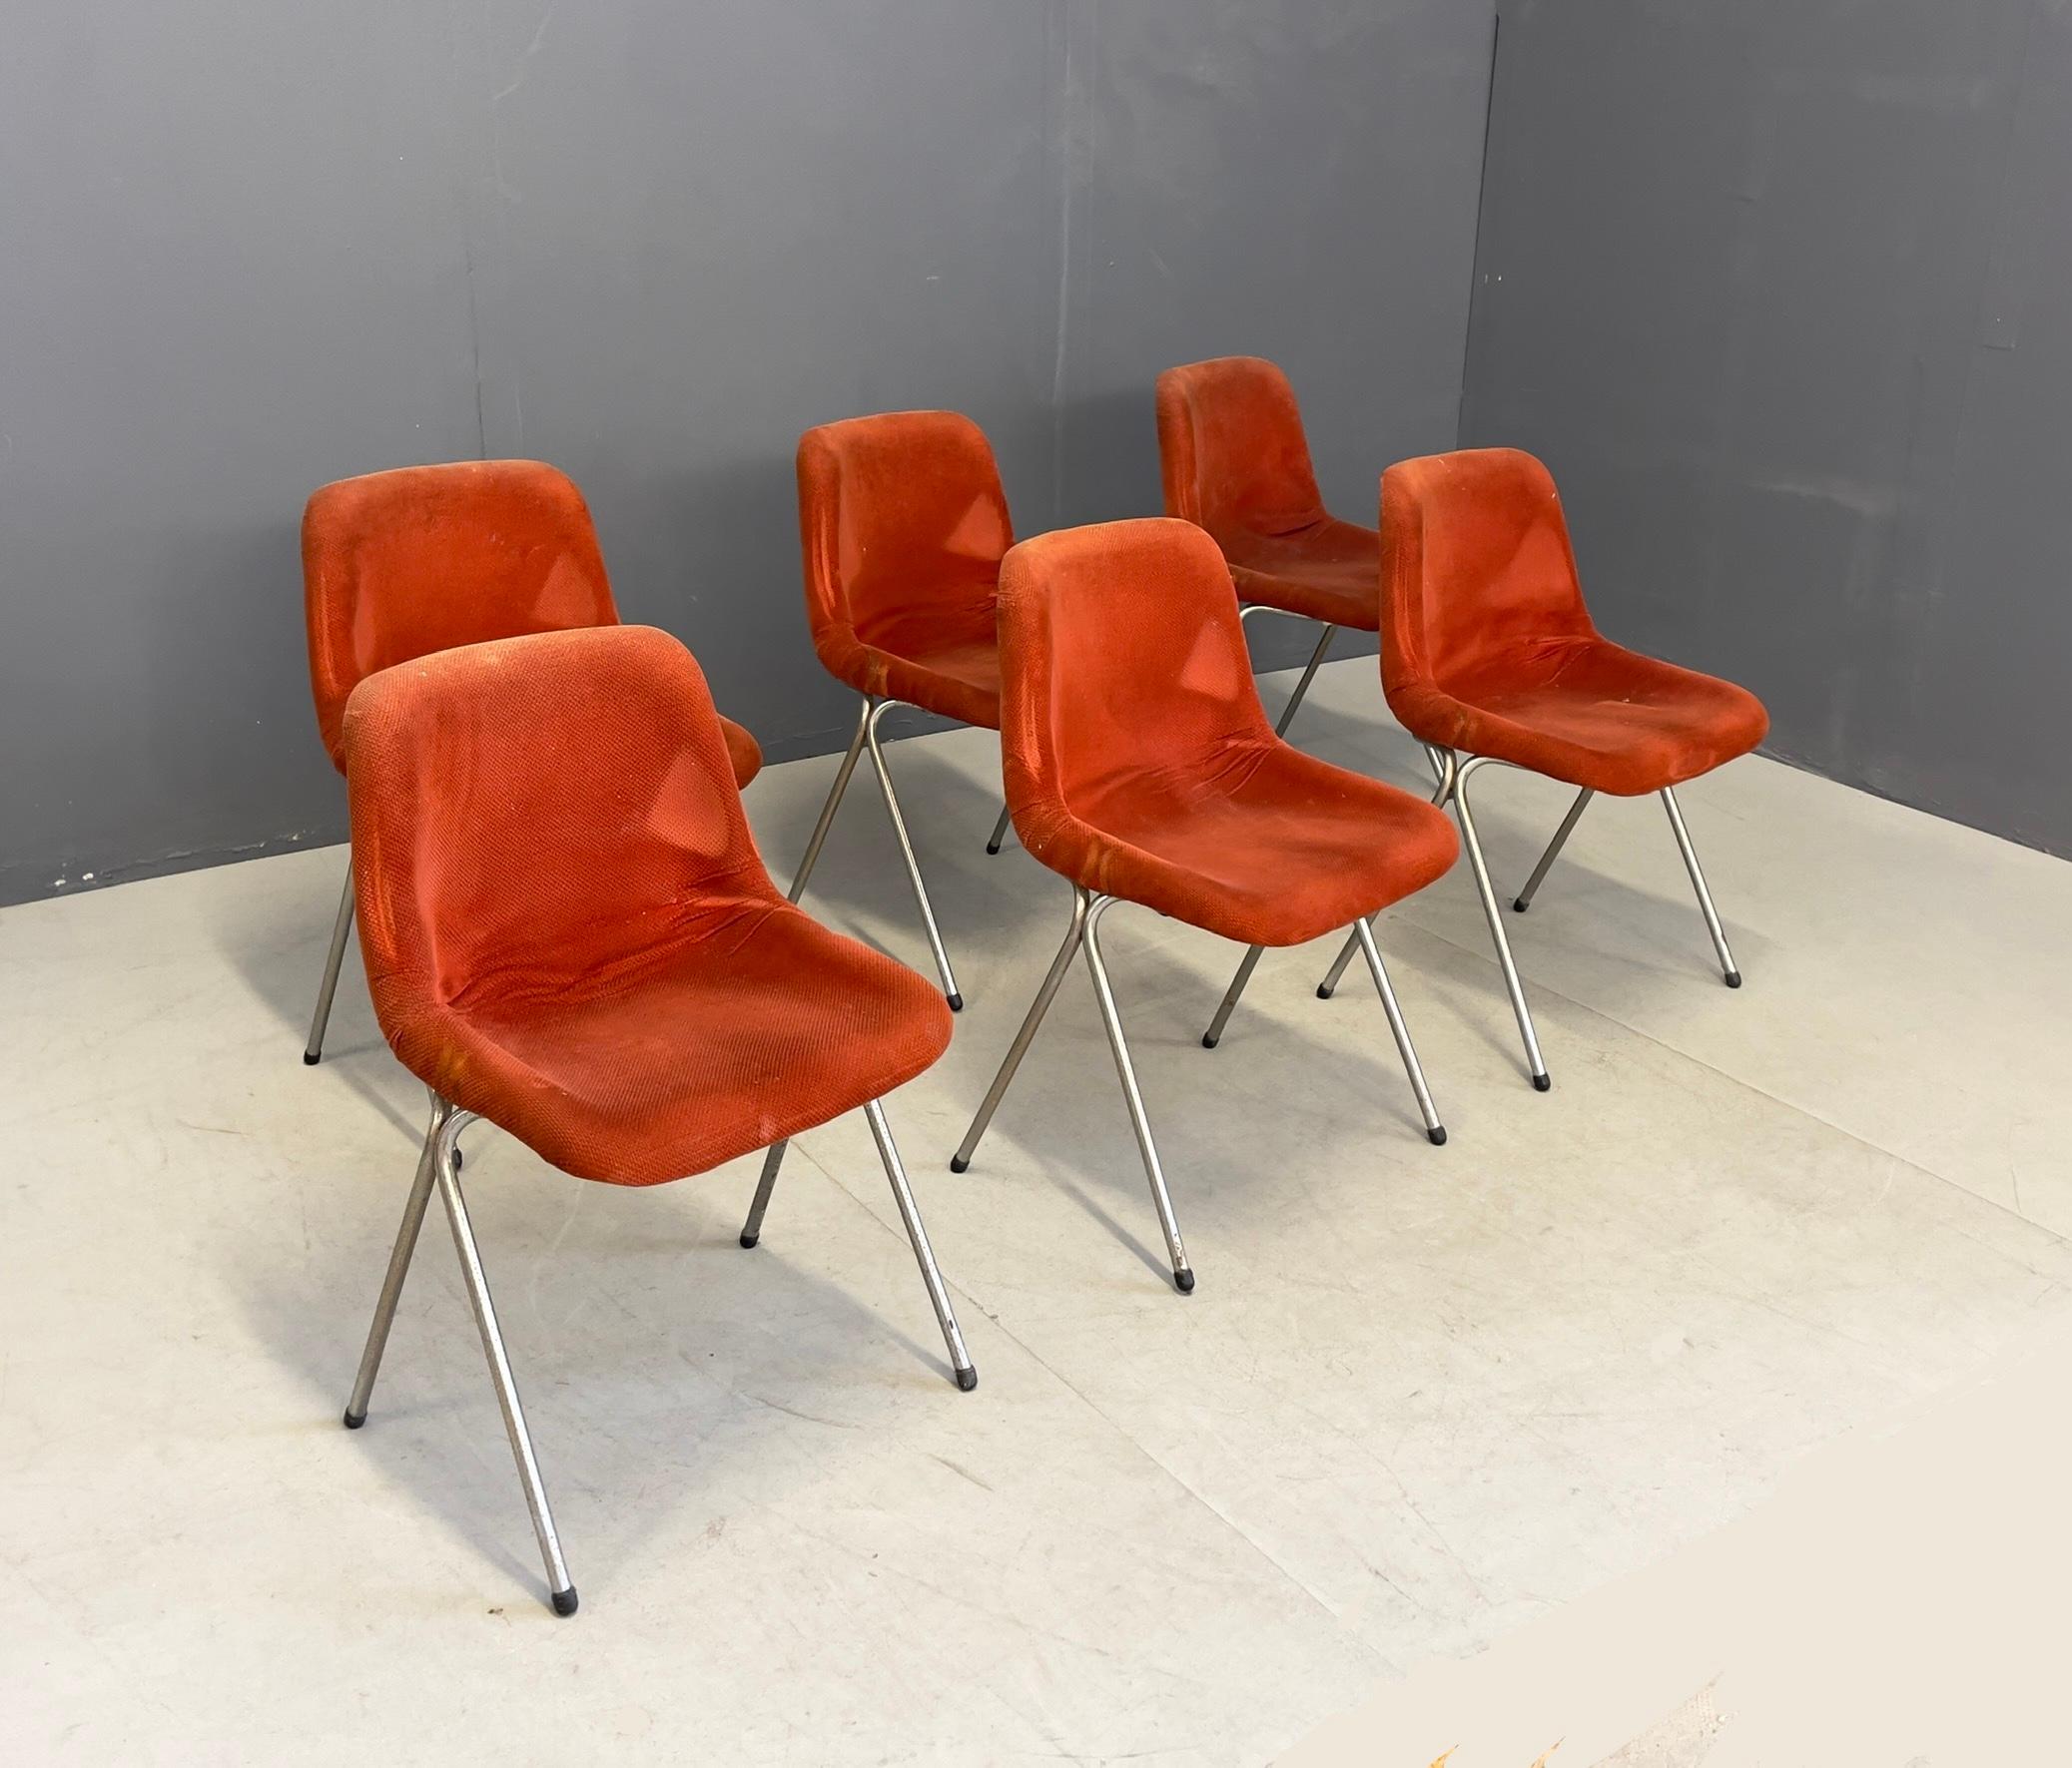 Six chairs with chromed metal frame, plastic material, and red fabric upholstery. Italian manufacture. 1960s.